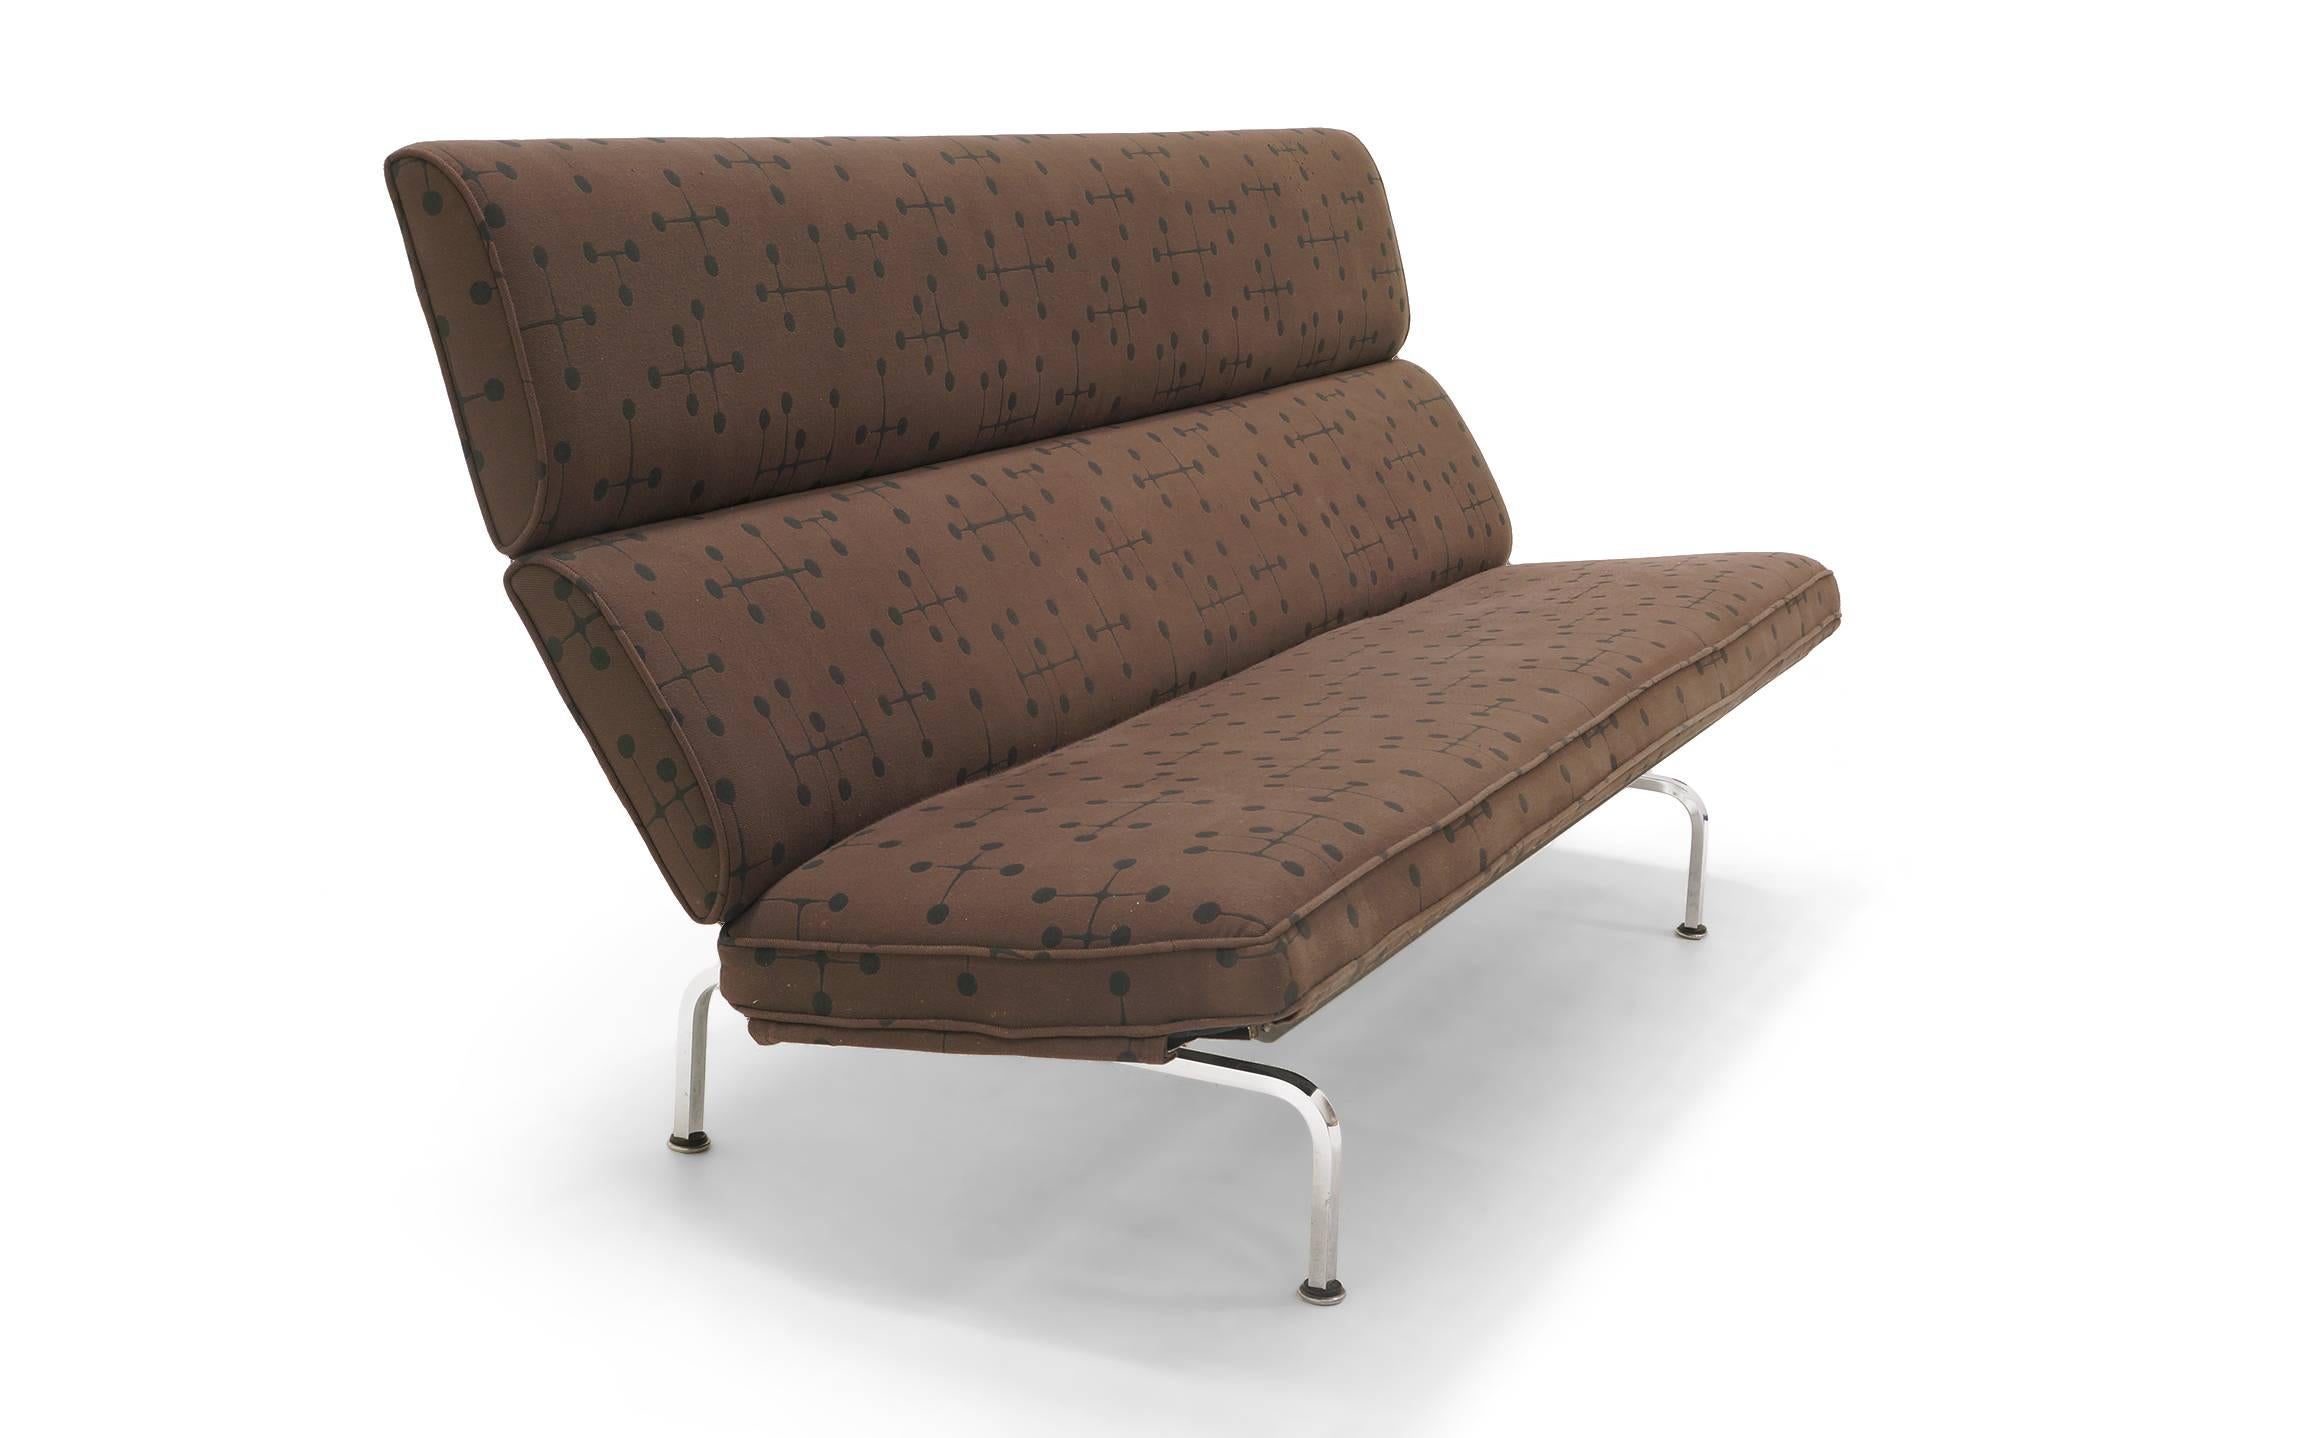 Early Charles and Ray Eames sofa compact for Herman Miller in Eames dot pattern fabric by Maharam. This vintage sofa was reupholstered several years ago. A nice example of this design in an iconic Eames fabric.